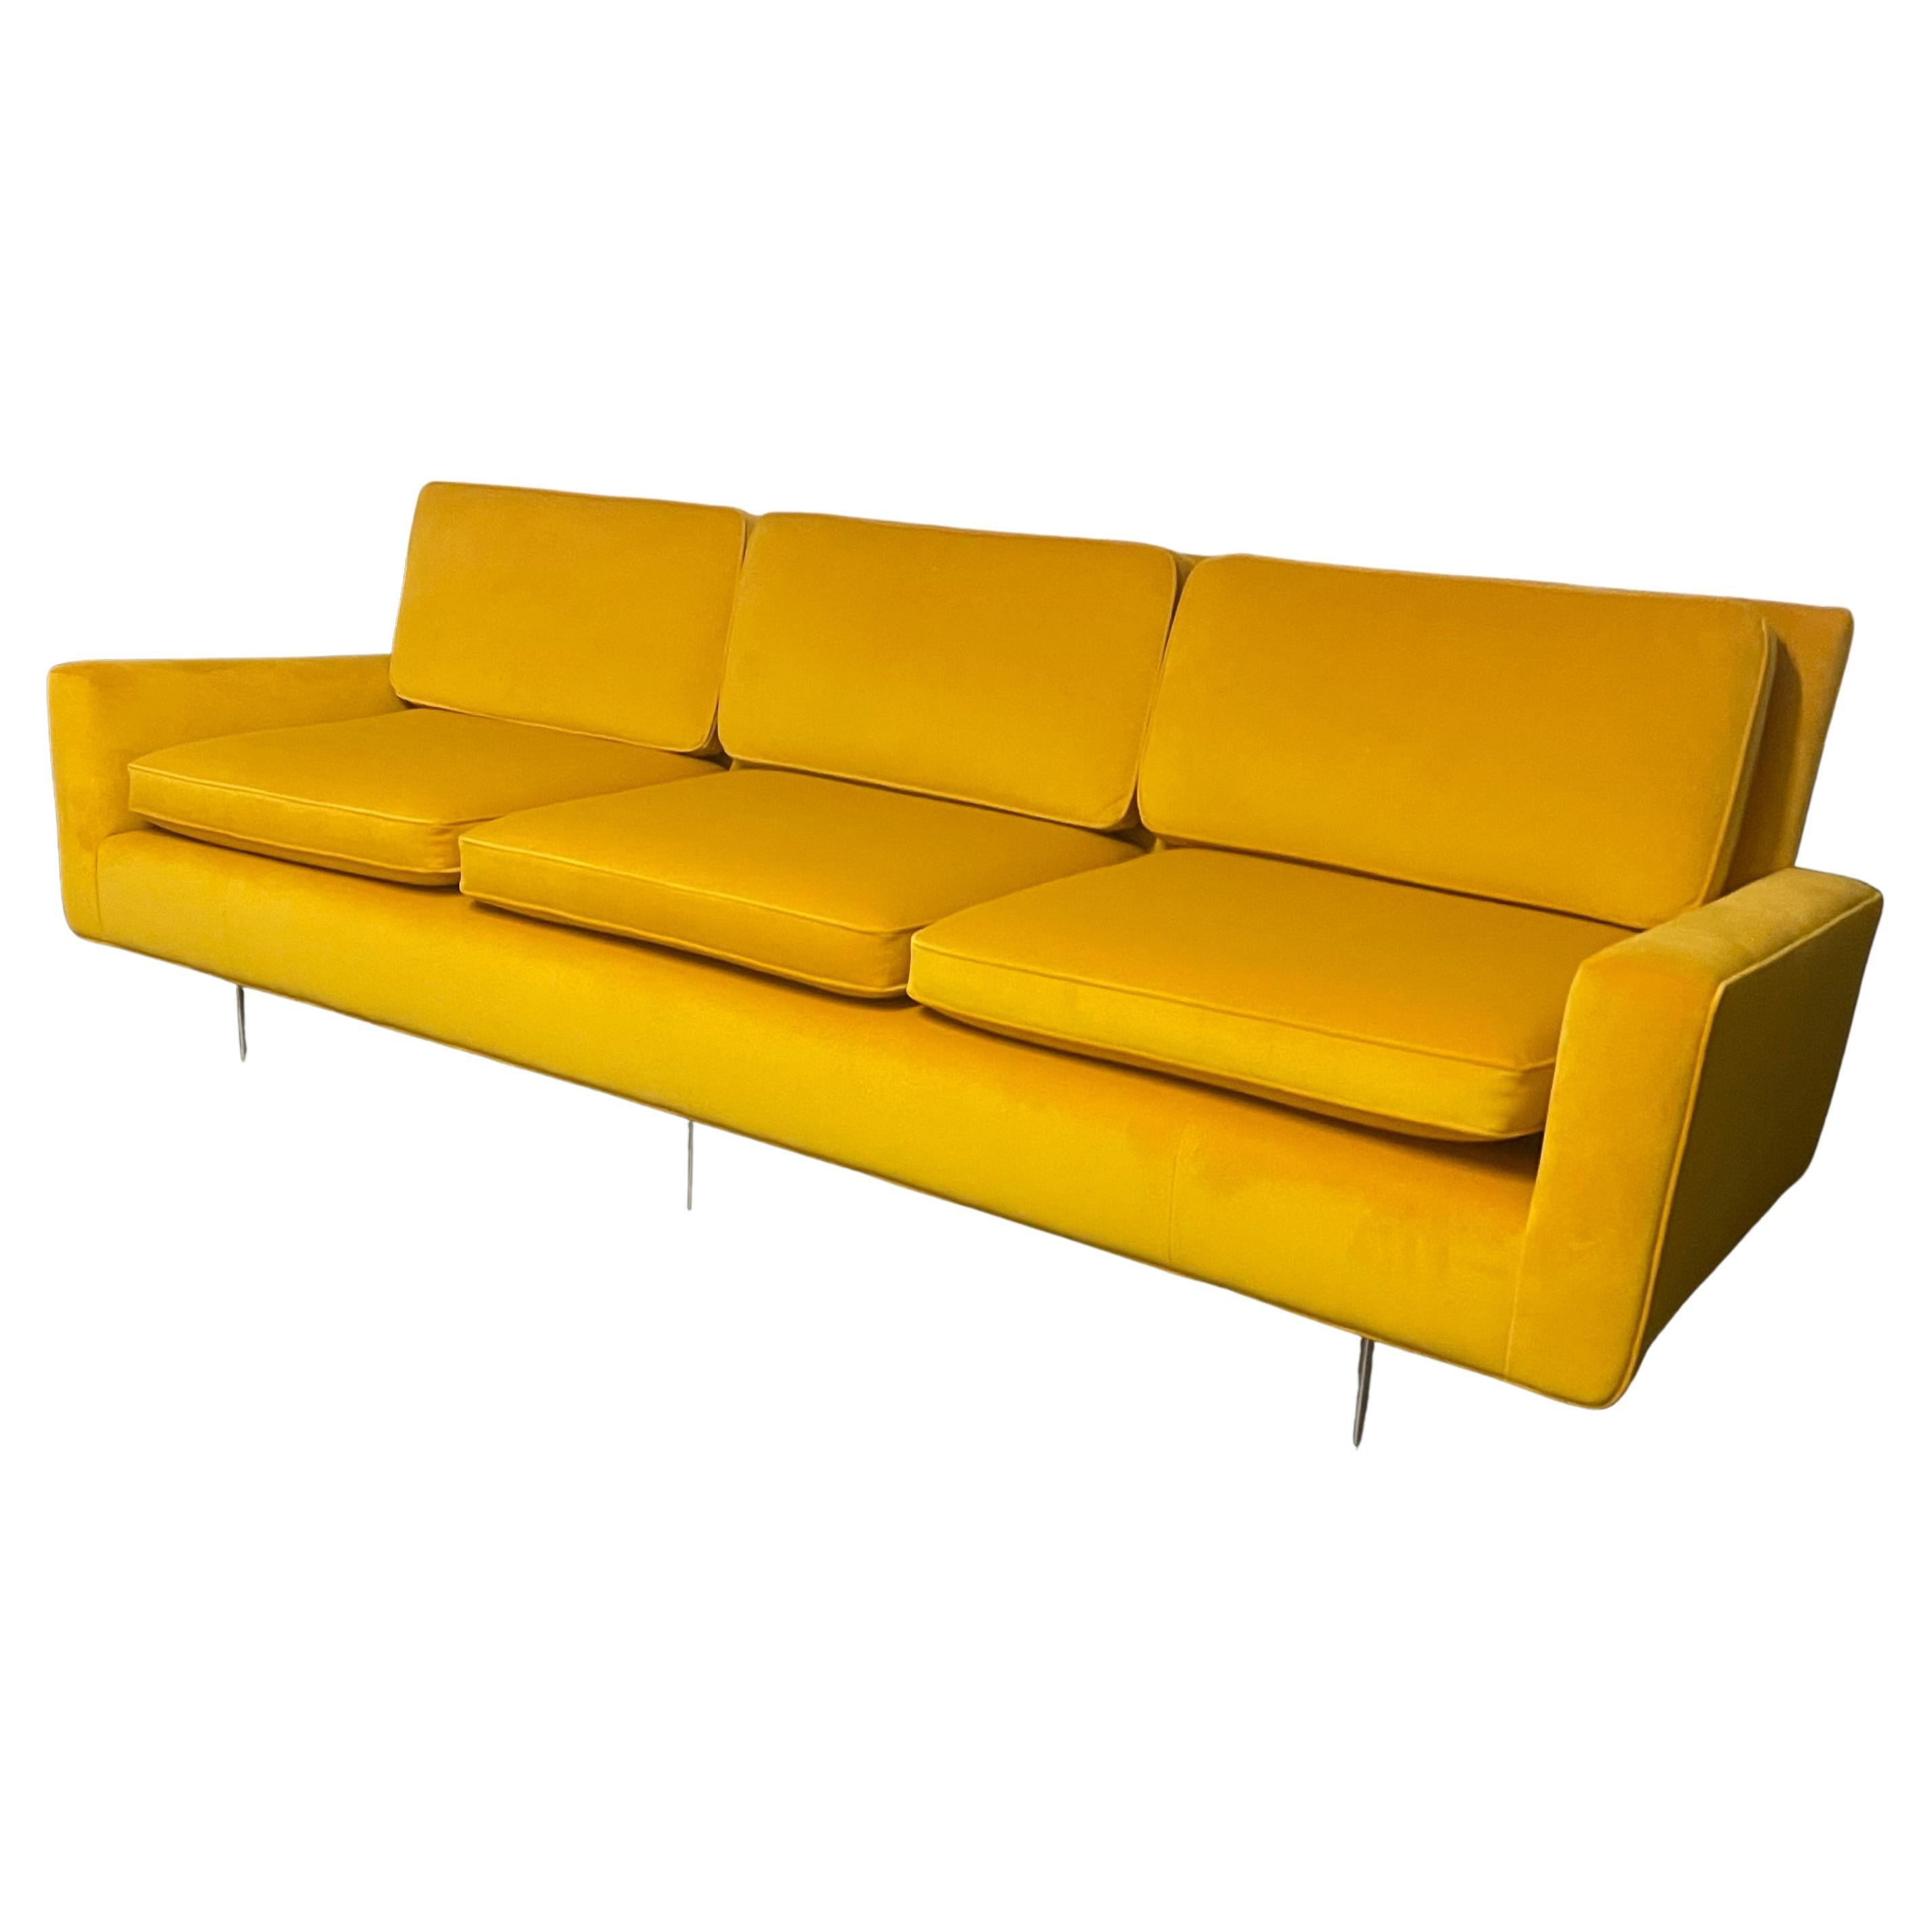 Wonderful No. 26 Sofa by Florence Knoll for Knoll International